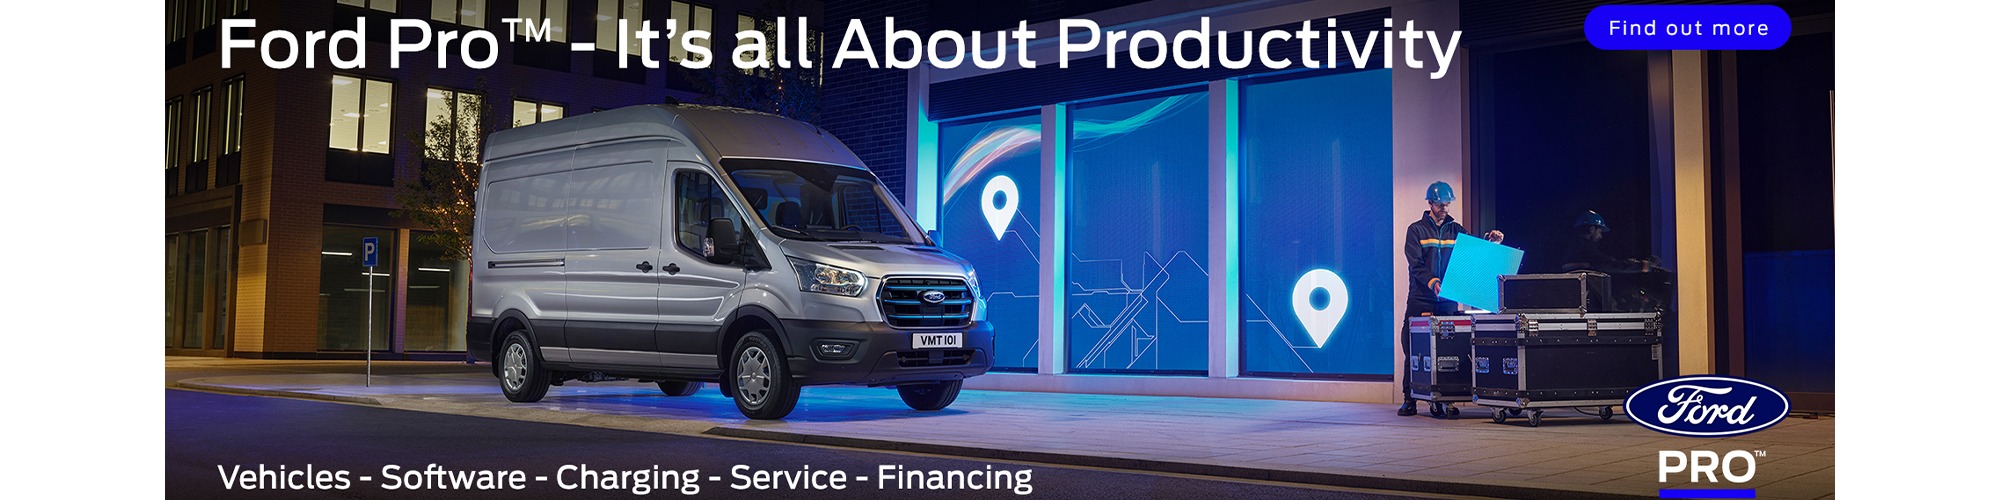 ford-transit fordpro Banner